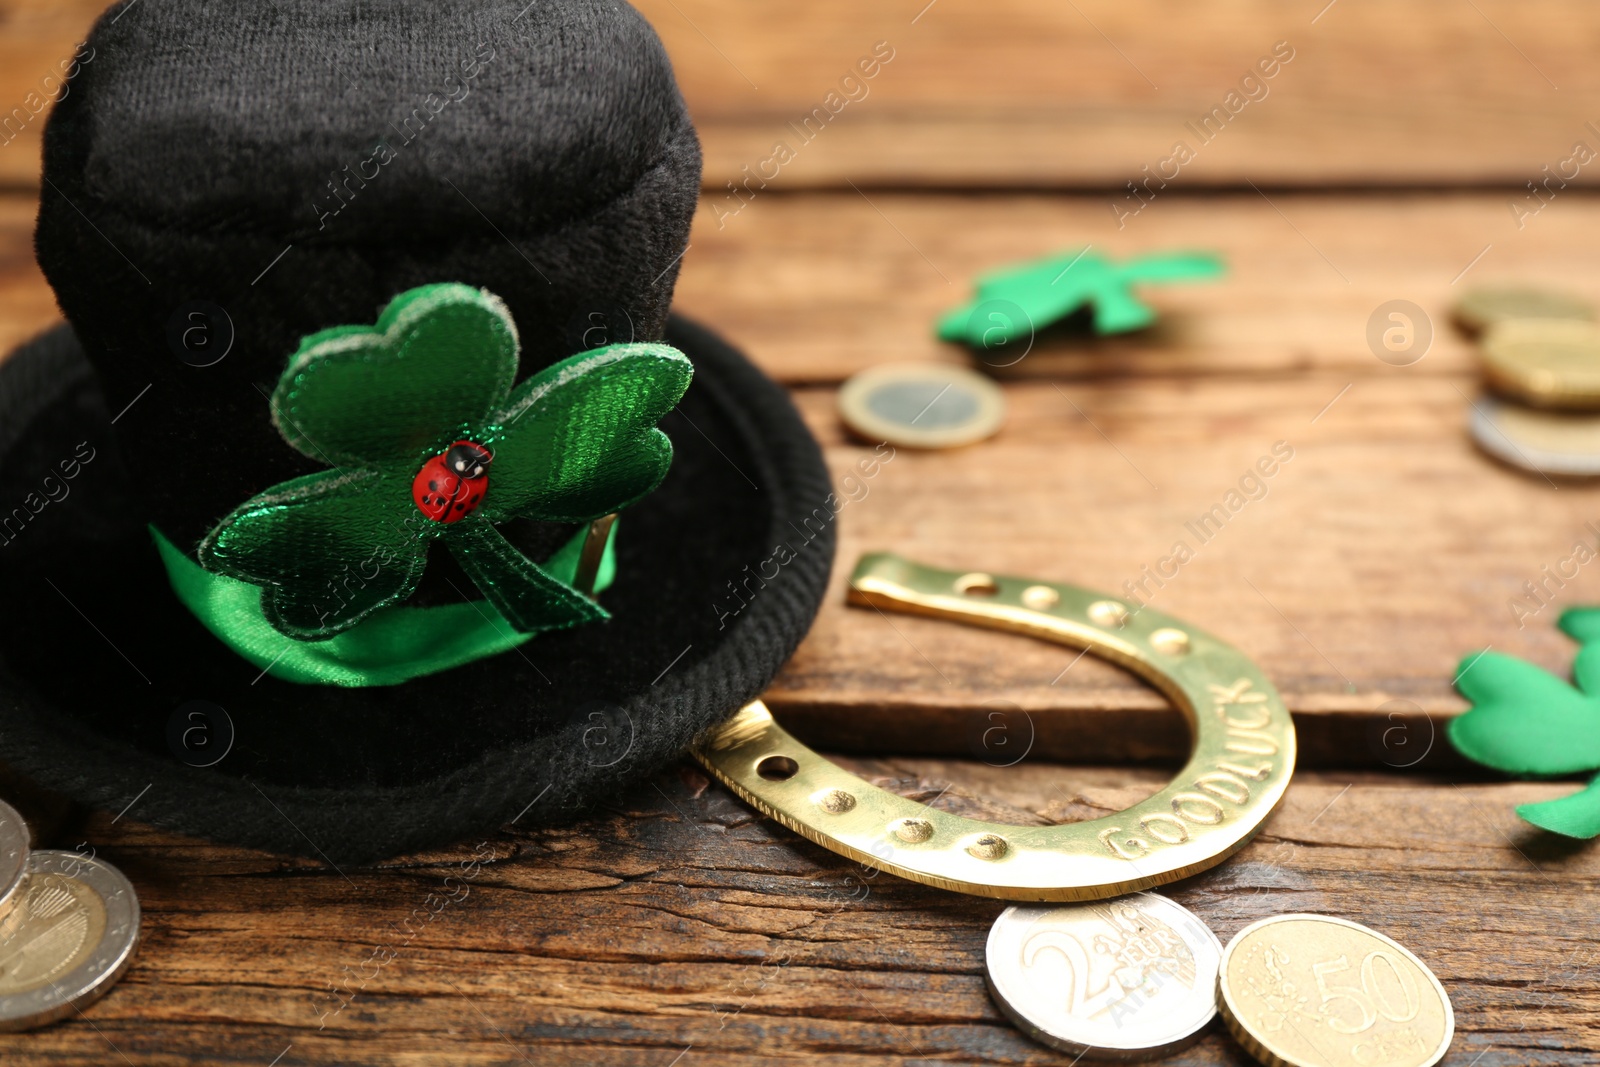 Photo of Leprechaun hat, decorative clover leaves, horseshoe and coins on wooden table, closeup view with space for text. St Patrick's Day celebration